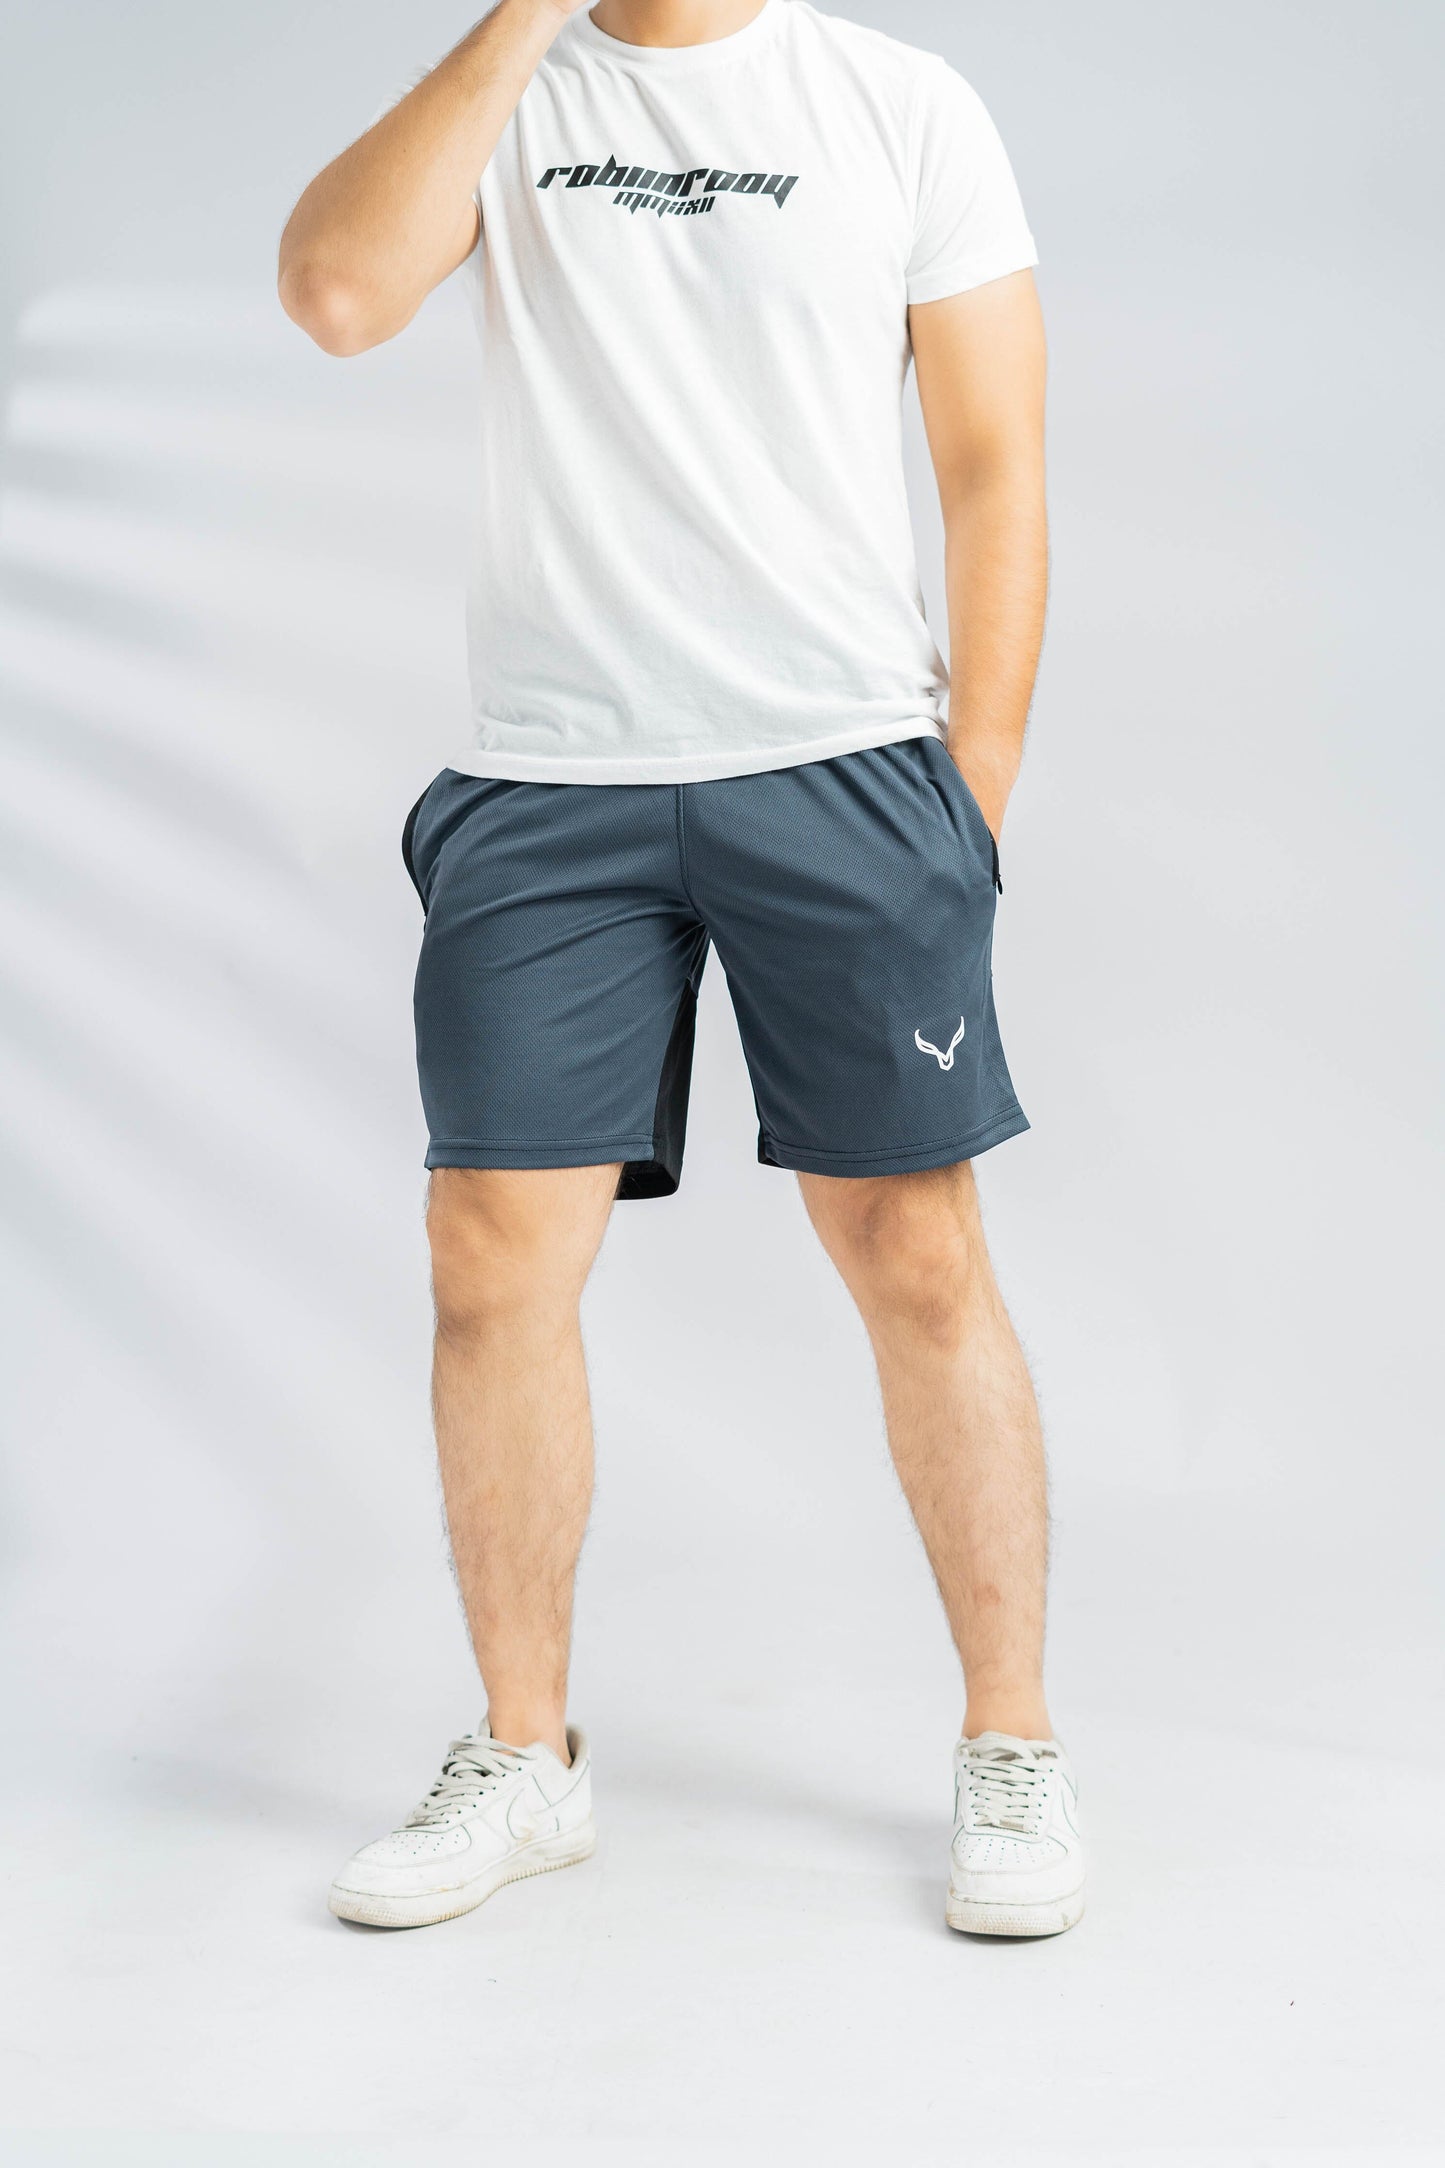 Polo Athletica Men's Rapid-Dry Gym Activewear Shorts with Side Panel Men's Shorts Polo Republica 